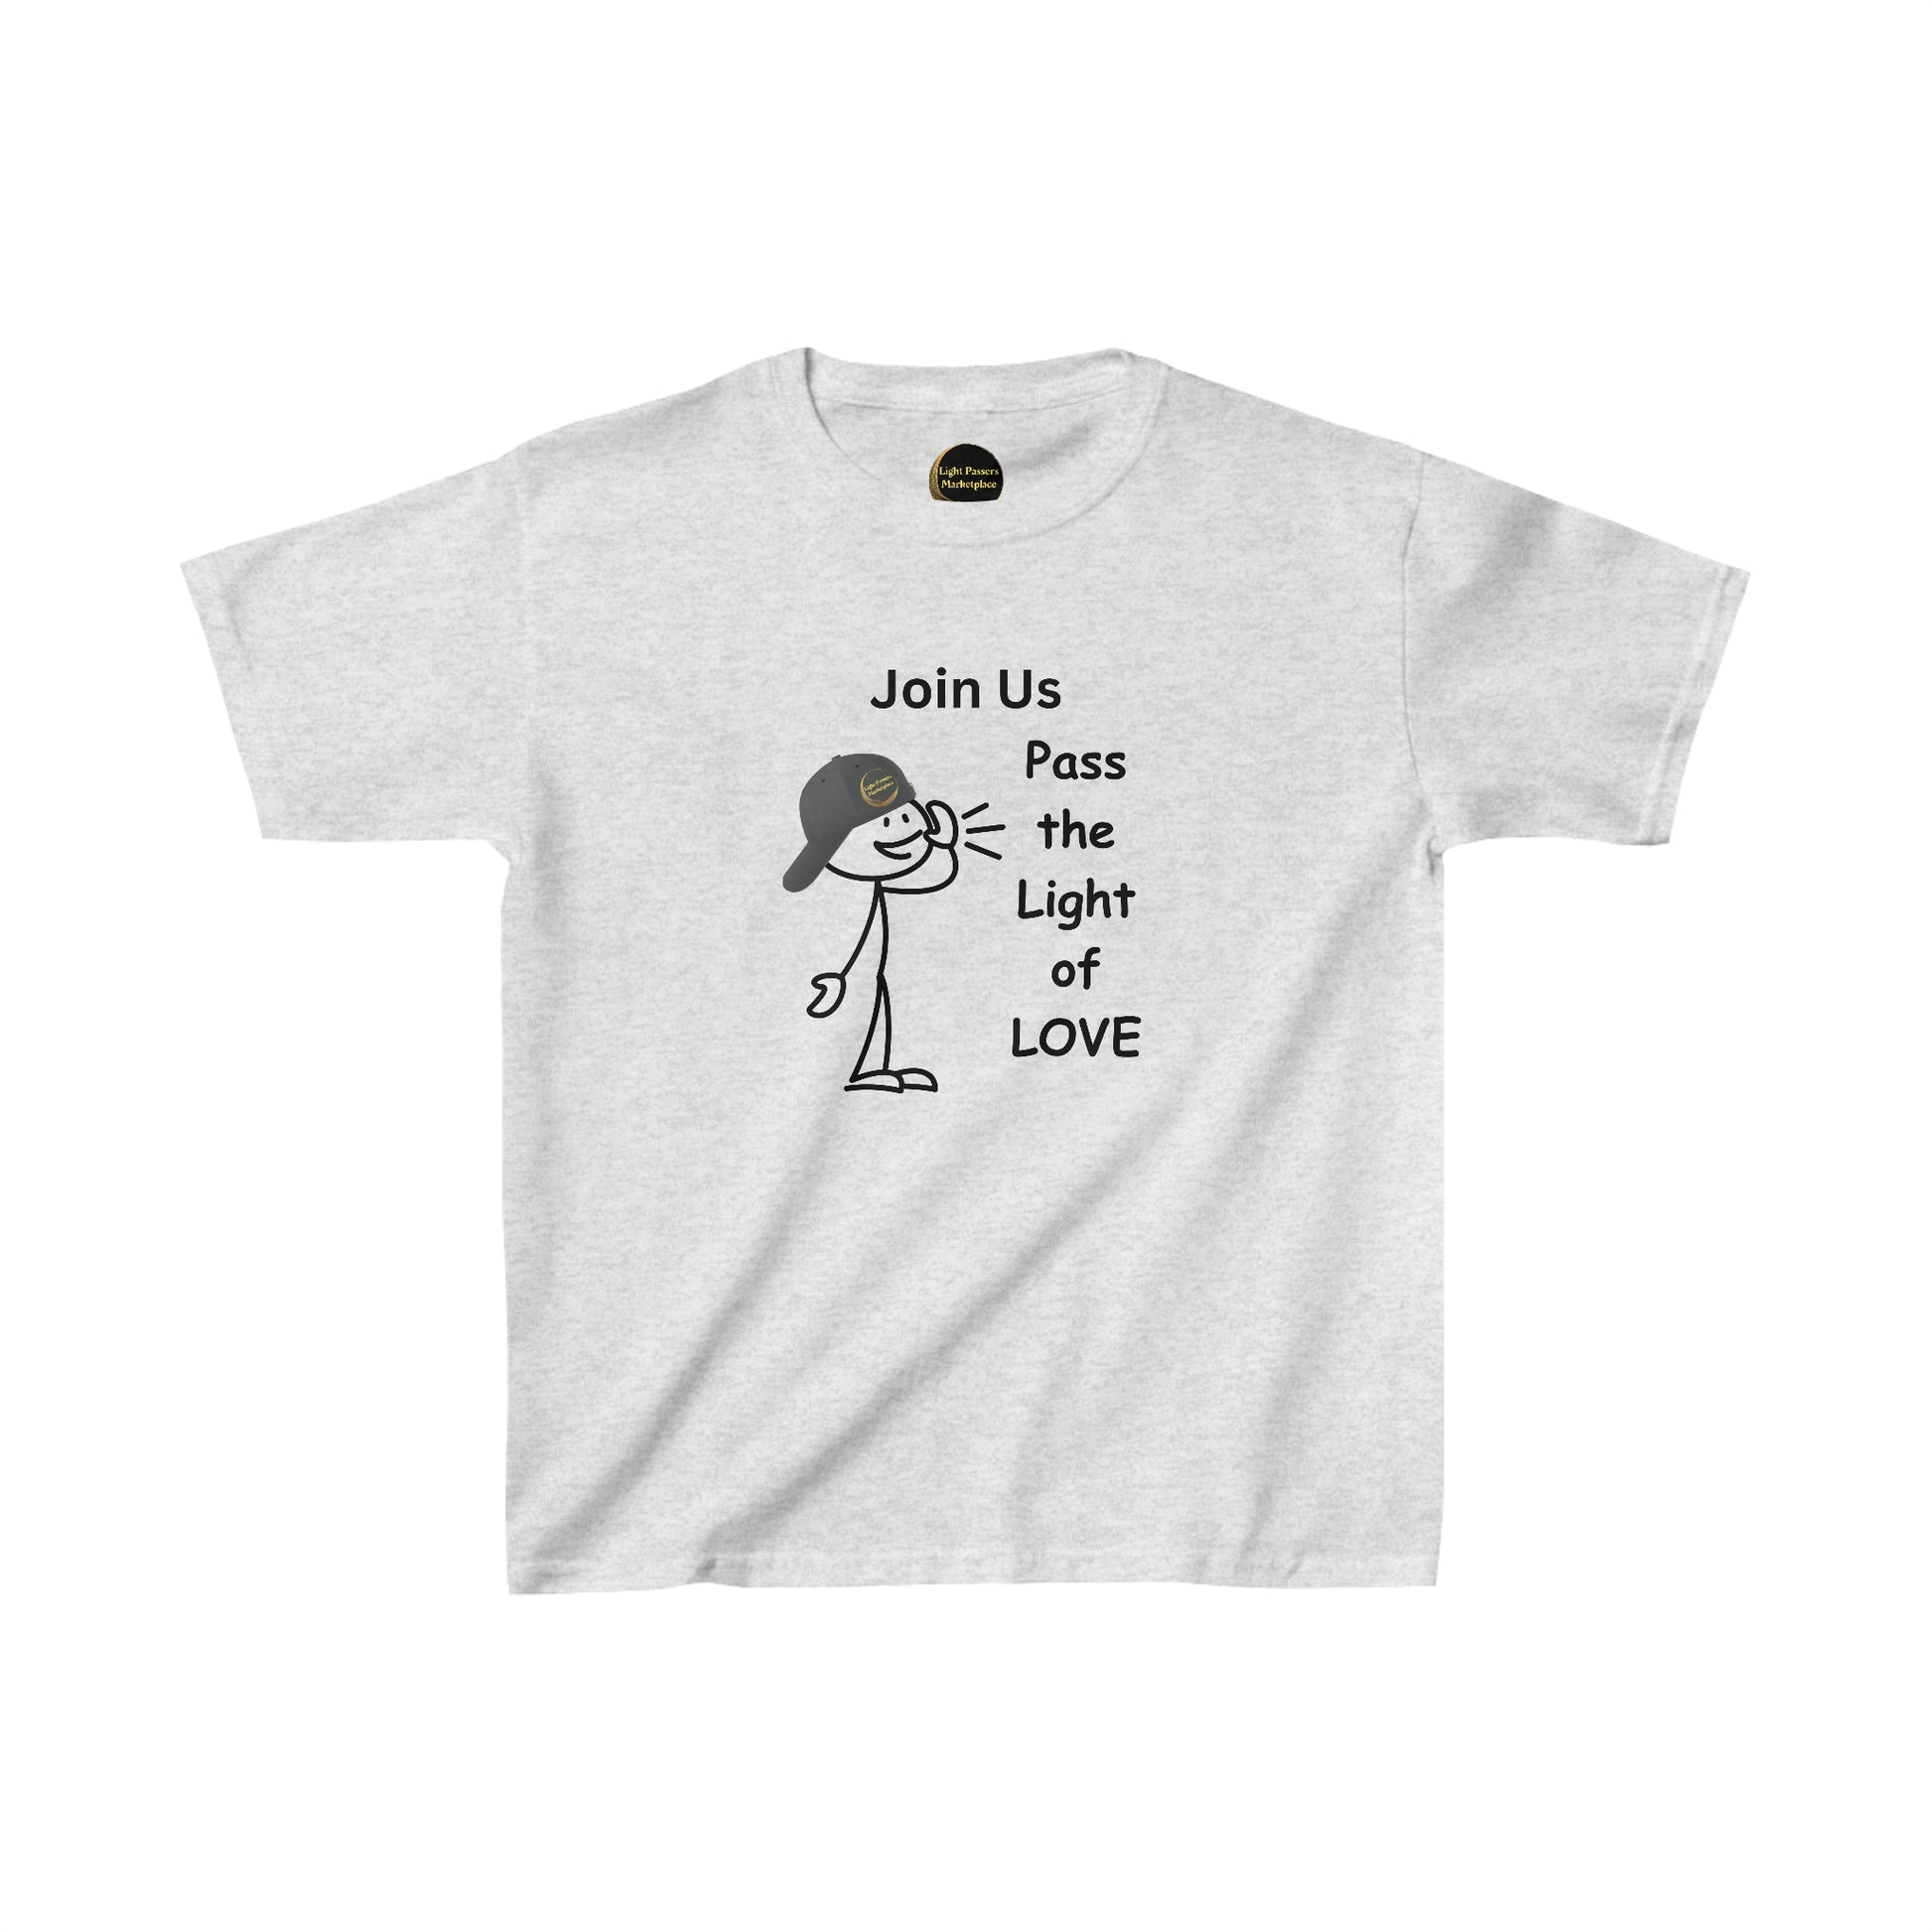 A youth t-shirt featuring a cartoon character with a hat, on a white background. Made of 100% cotton, with twill tape shoulders for durability and ribbed knitting for a curl-resistant collar.